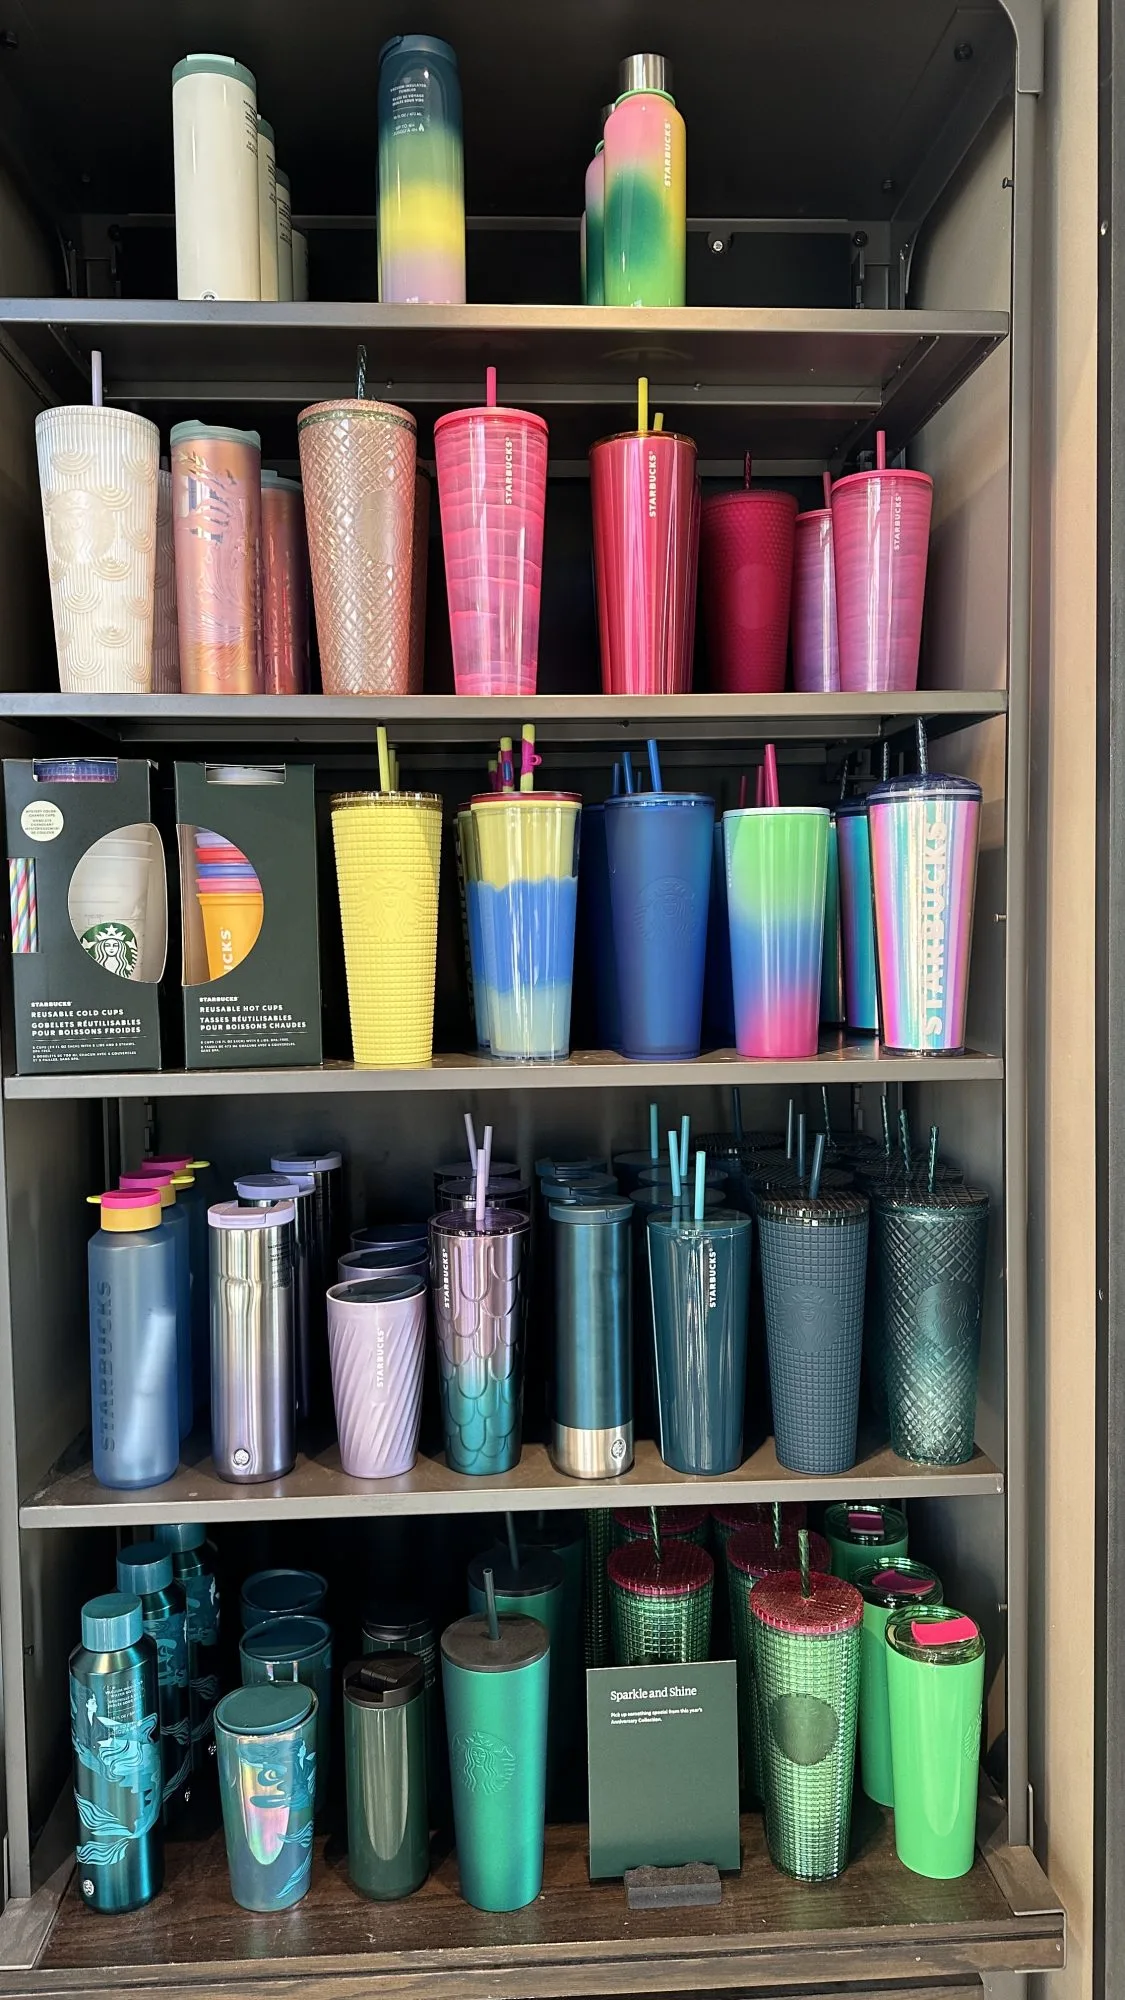 Starbucks Summer 2022 Color Change Venti Cold Cups with Straws